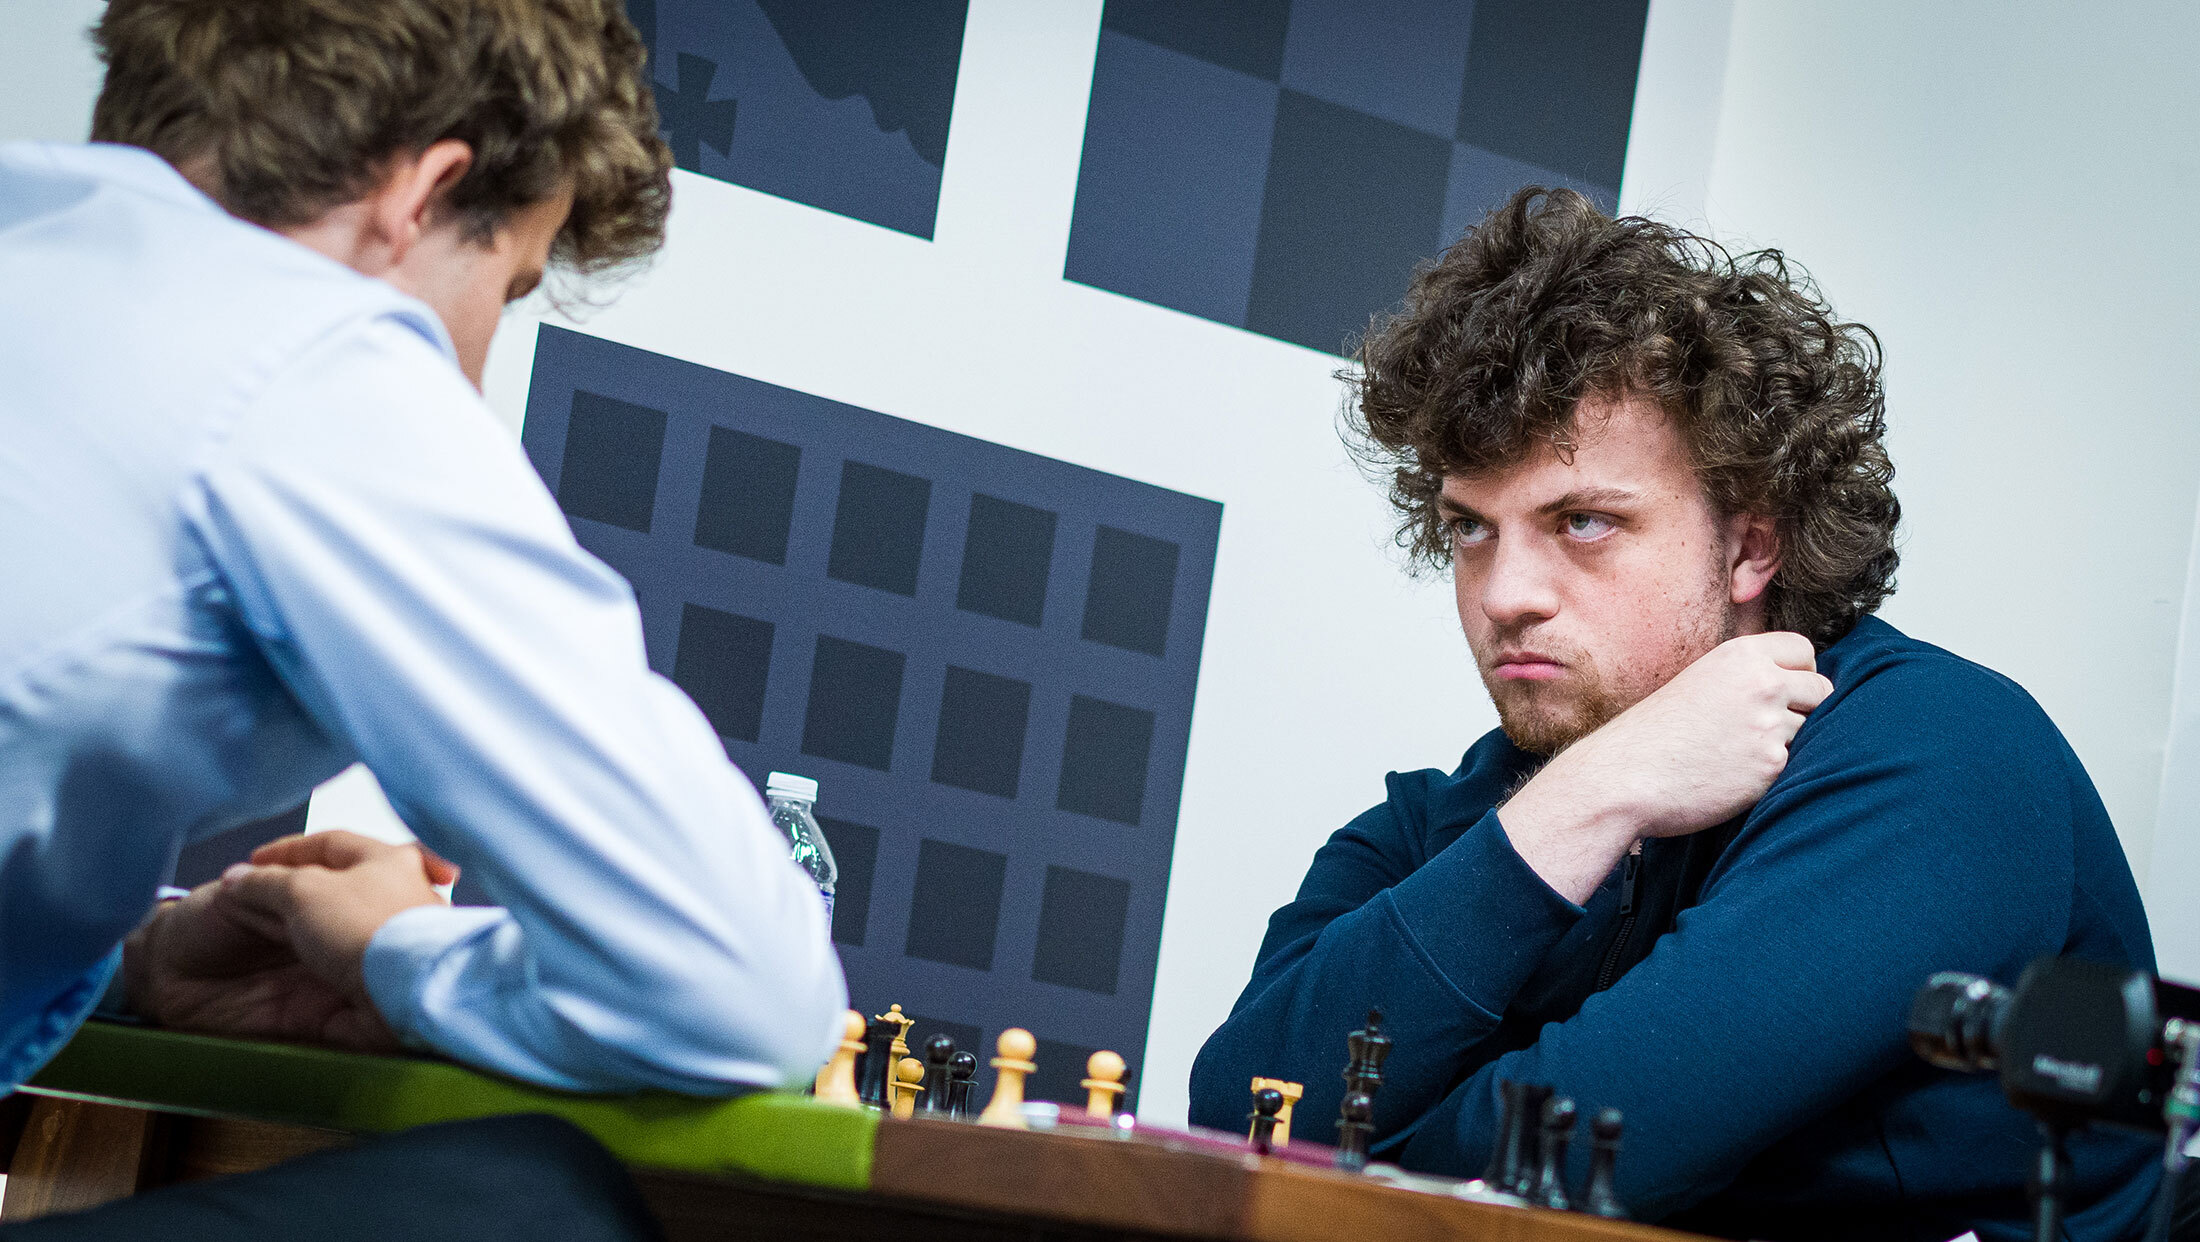 So Suffers At Sinquefield; Carlsen Misses Another Win 